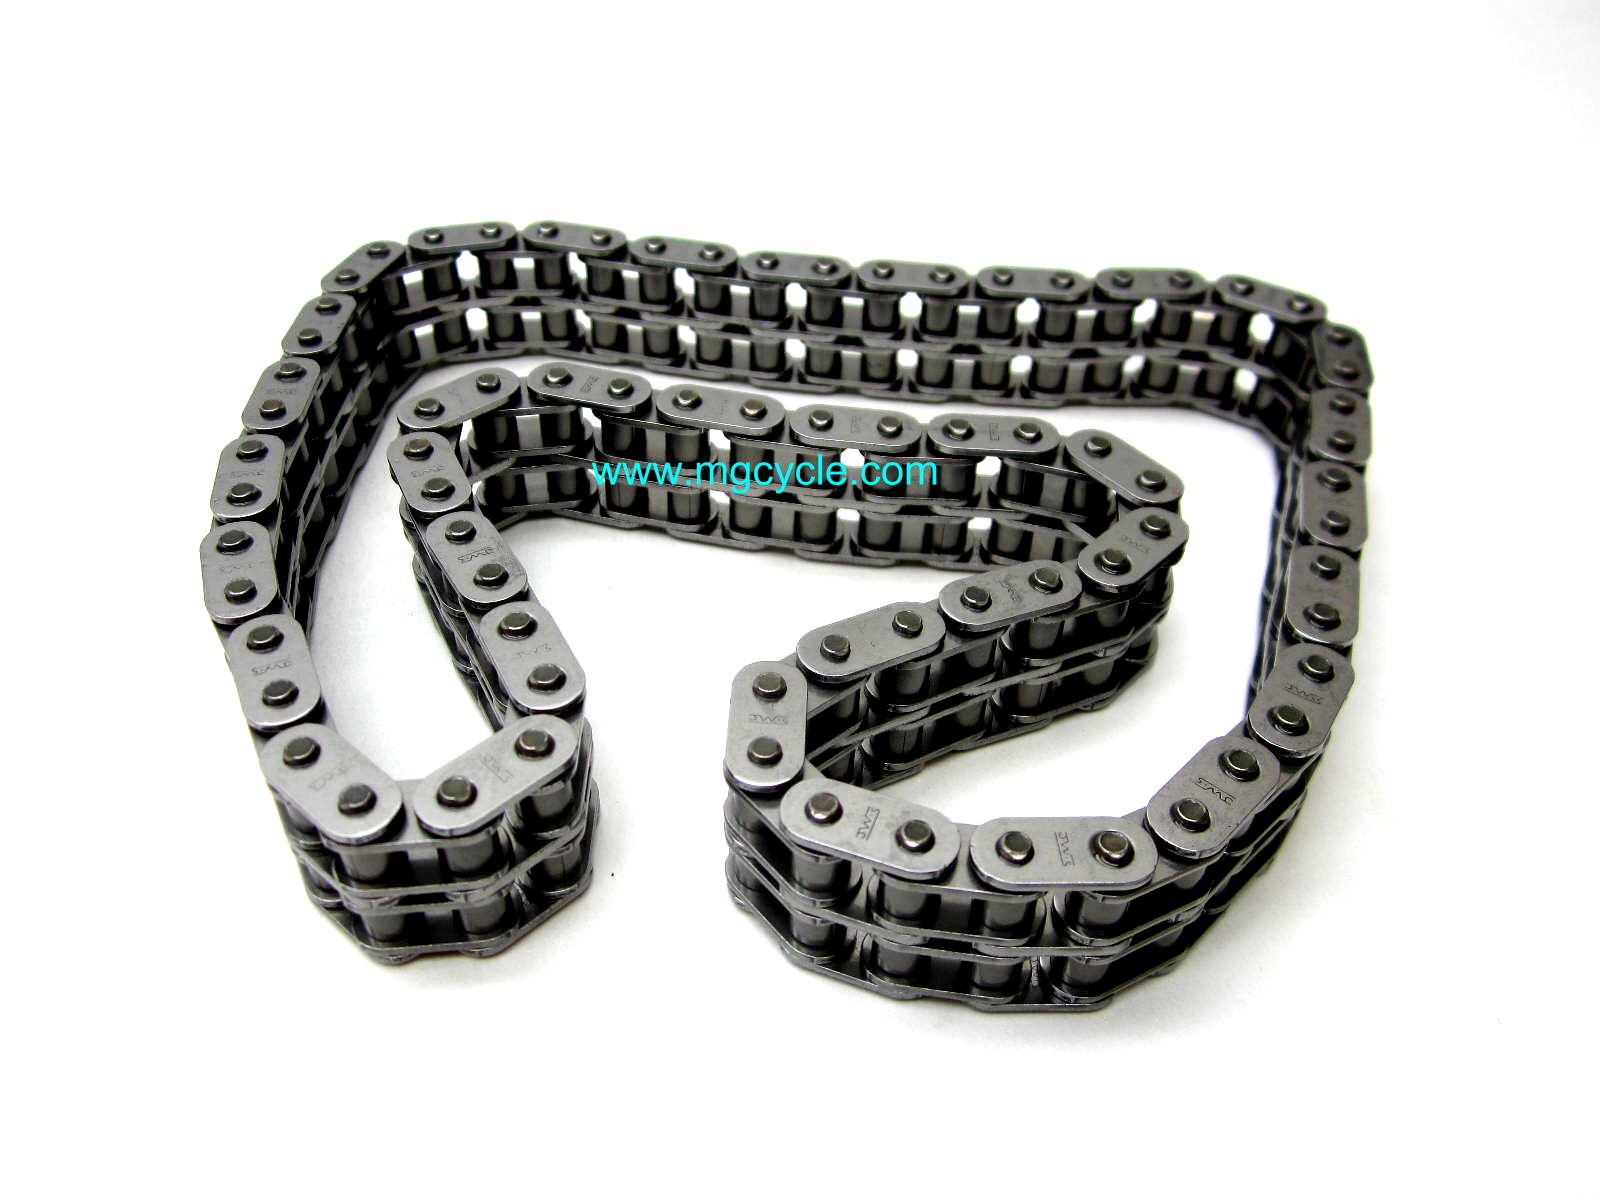 One piece no master link timing chain 750/850/1000/1100 some1200